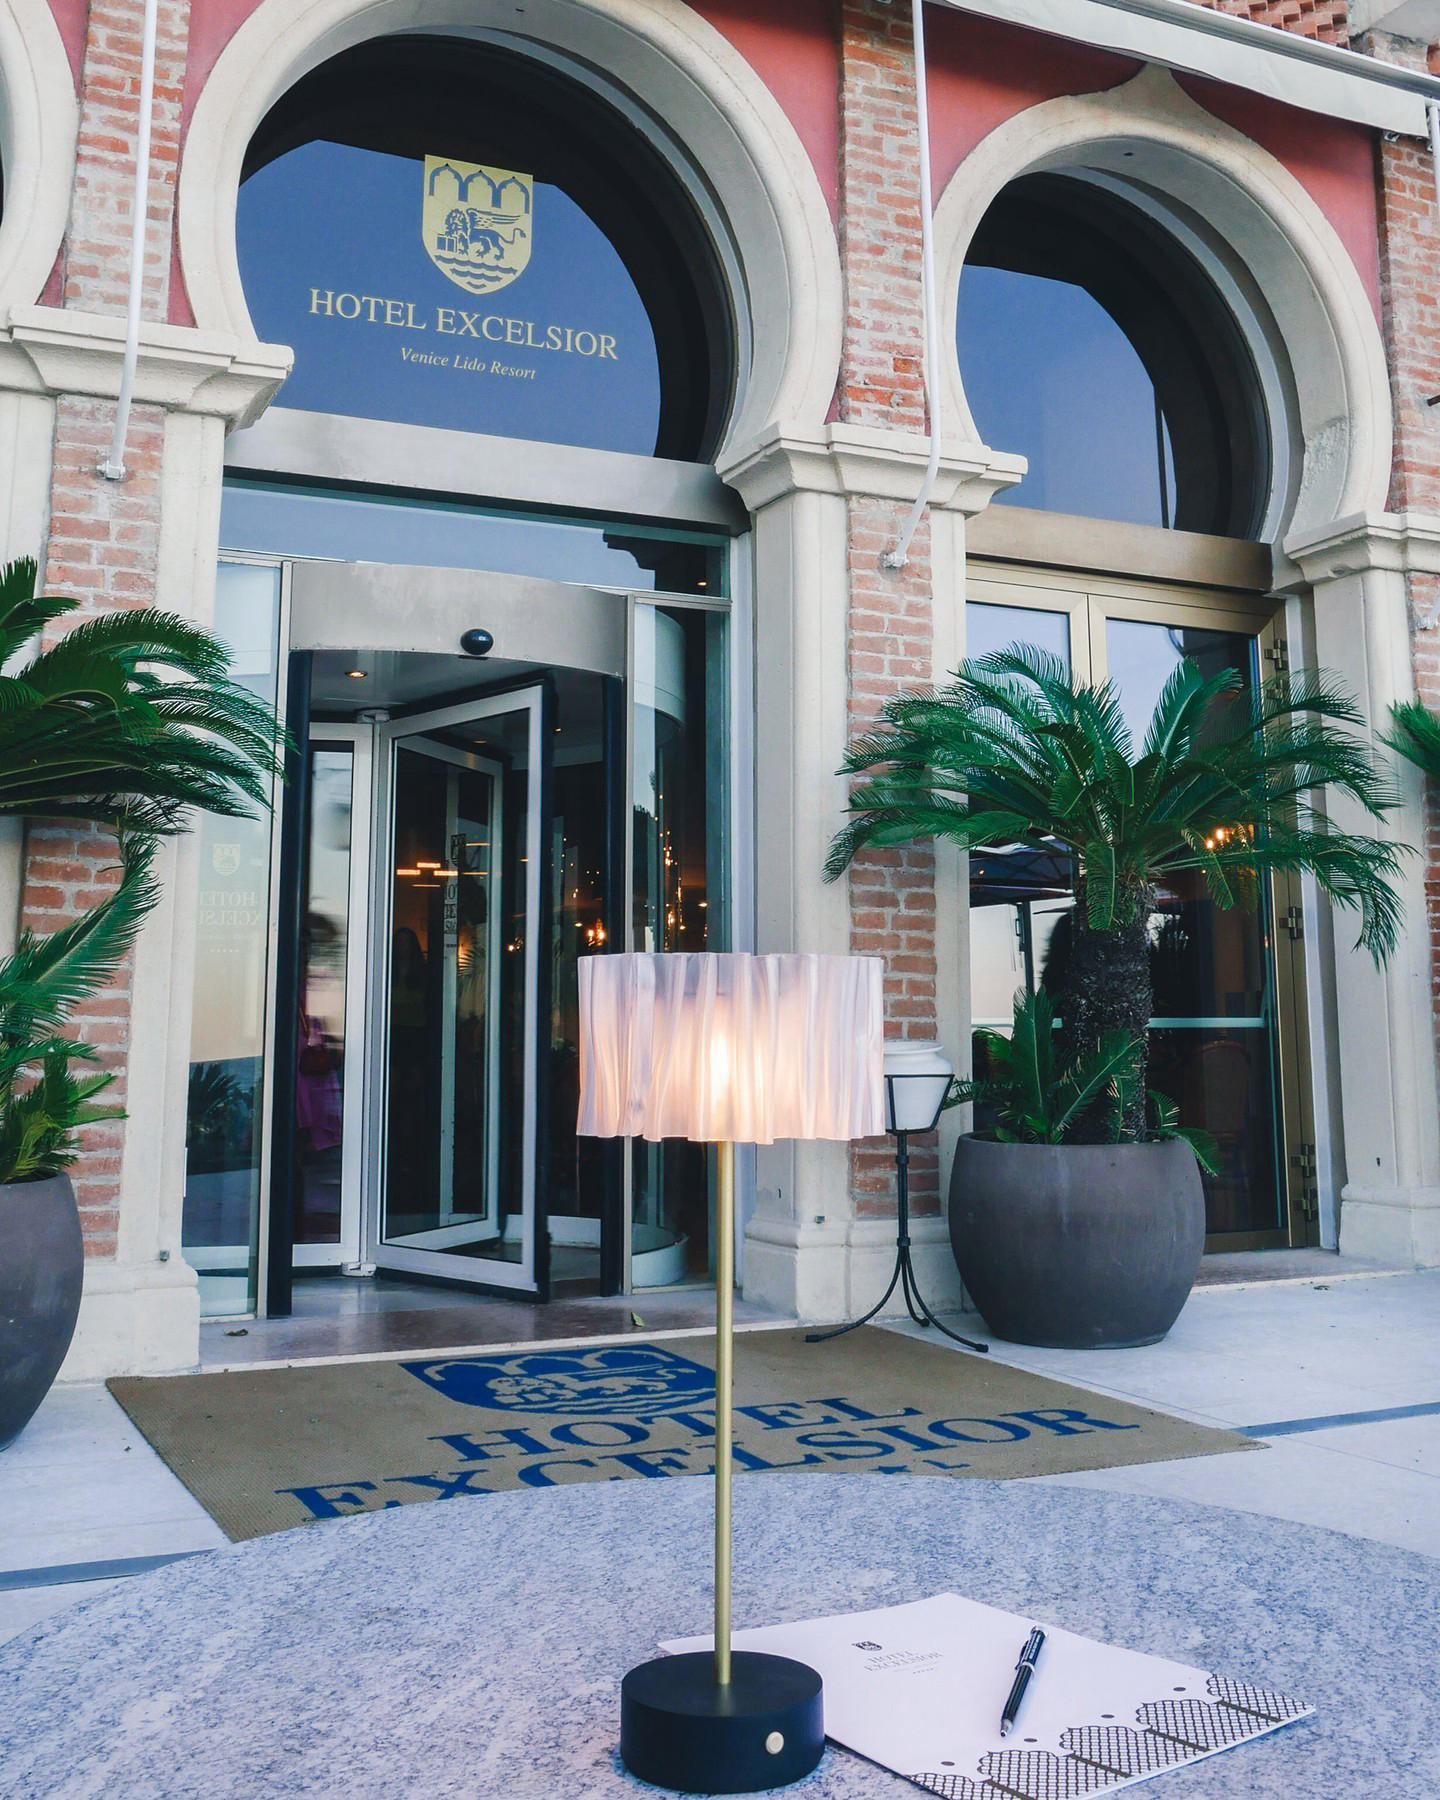 Hotel Excelsior Venice - All of us in the Excelsior team are delighted to stay in touch with our gue